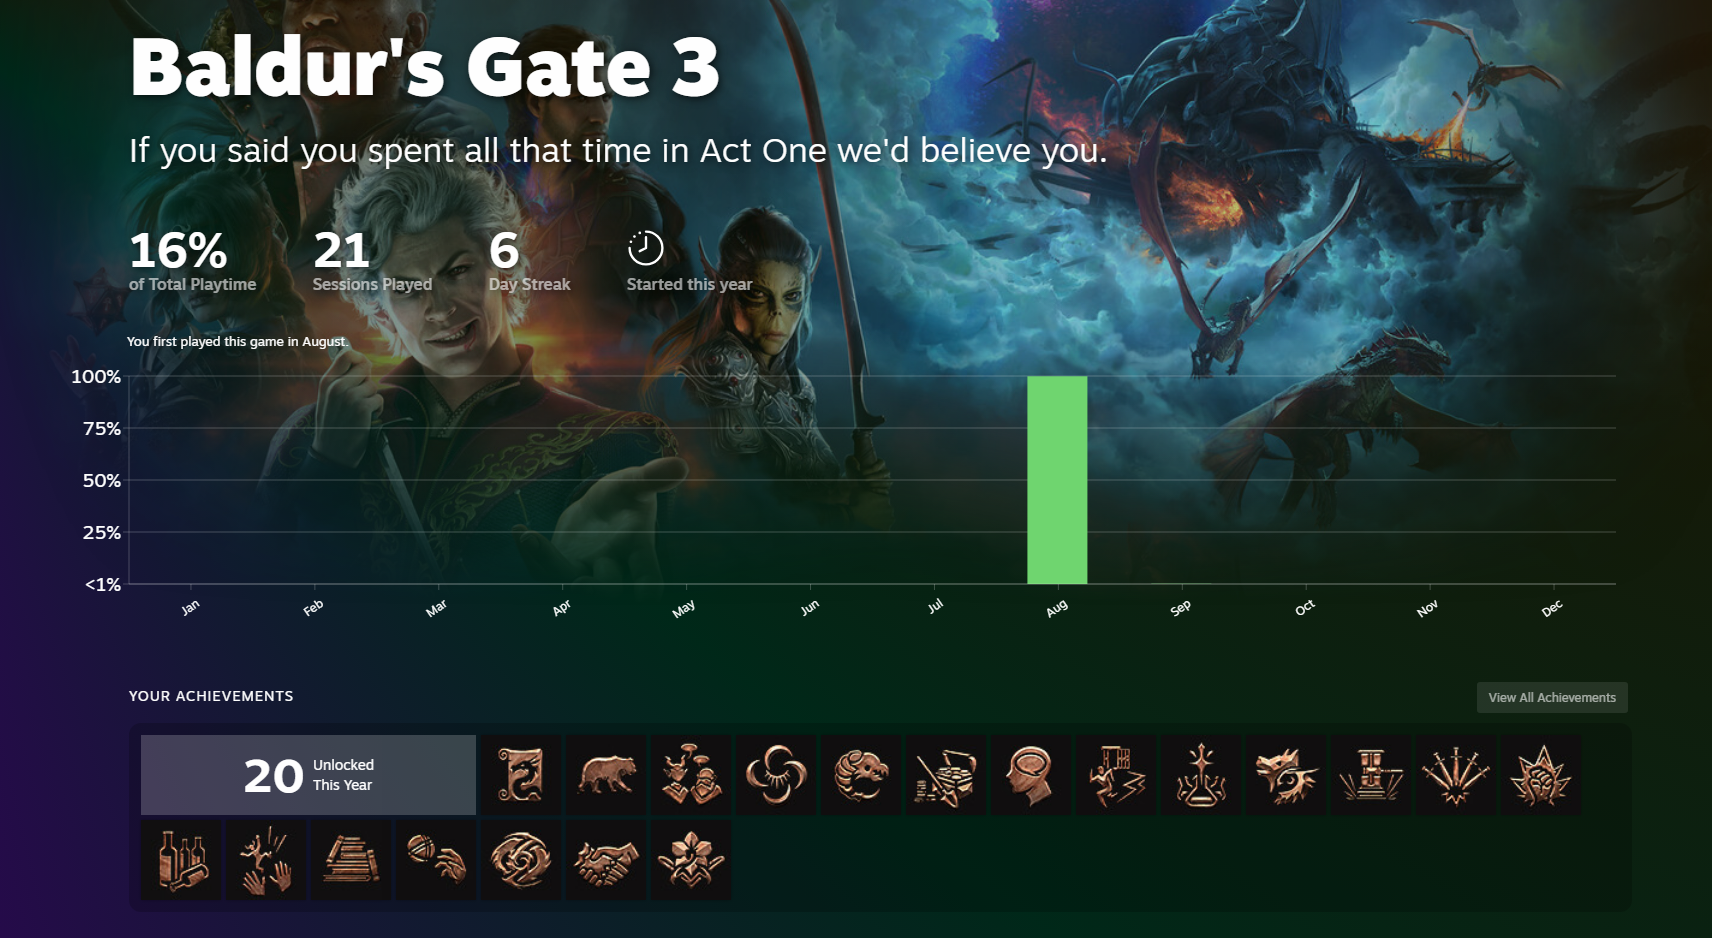 Screenshot of Chi's Baldur's Gate 3 stats from her 2023 Steam Year in Review. The text underneath the game title reads: "If you said you spent all that time in Act One we'd believe you." Chi's stats show that she has 16% of Total Playtime with the game, with 21 Sessions Played and a 6 Day Streak. There's a vertical bar graph as well that shows the months of the year, and August is the only one with a bar shown, since Chi only really got to play it fully during the game's release in August. She also has a total of 20 achievements unlocked this year.